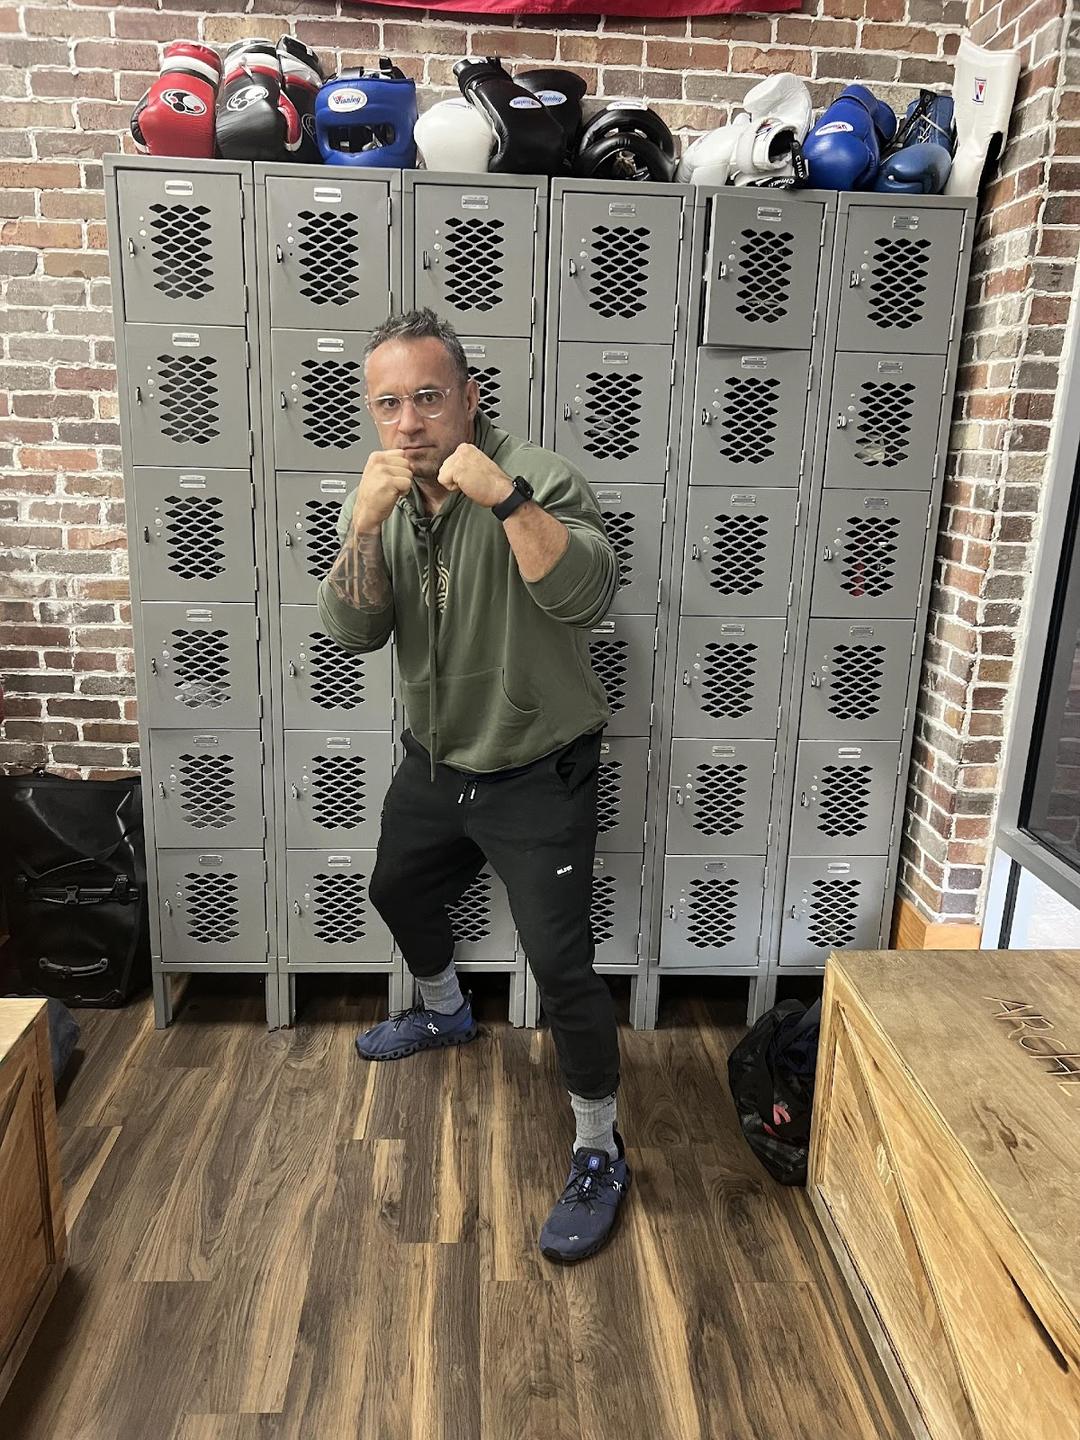 Boxing stance